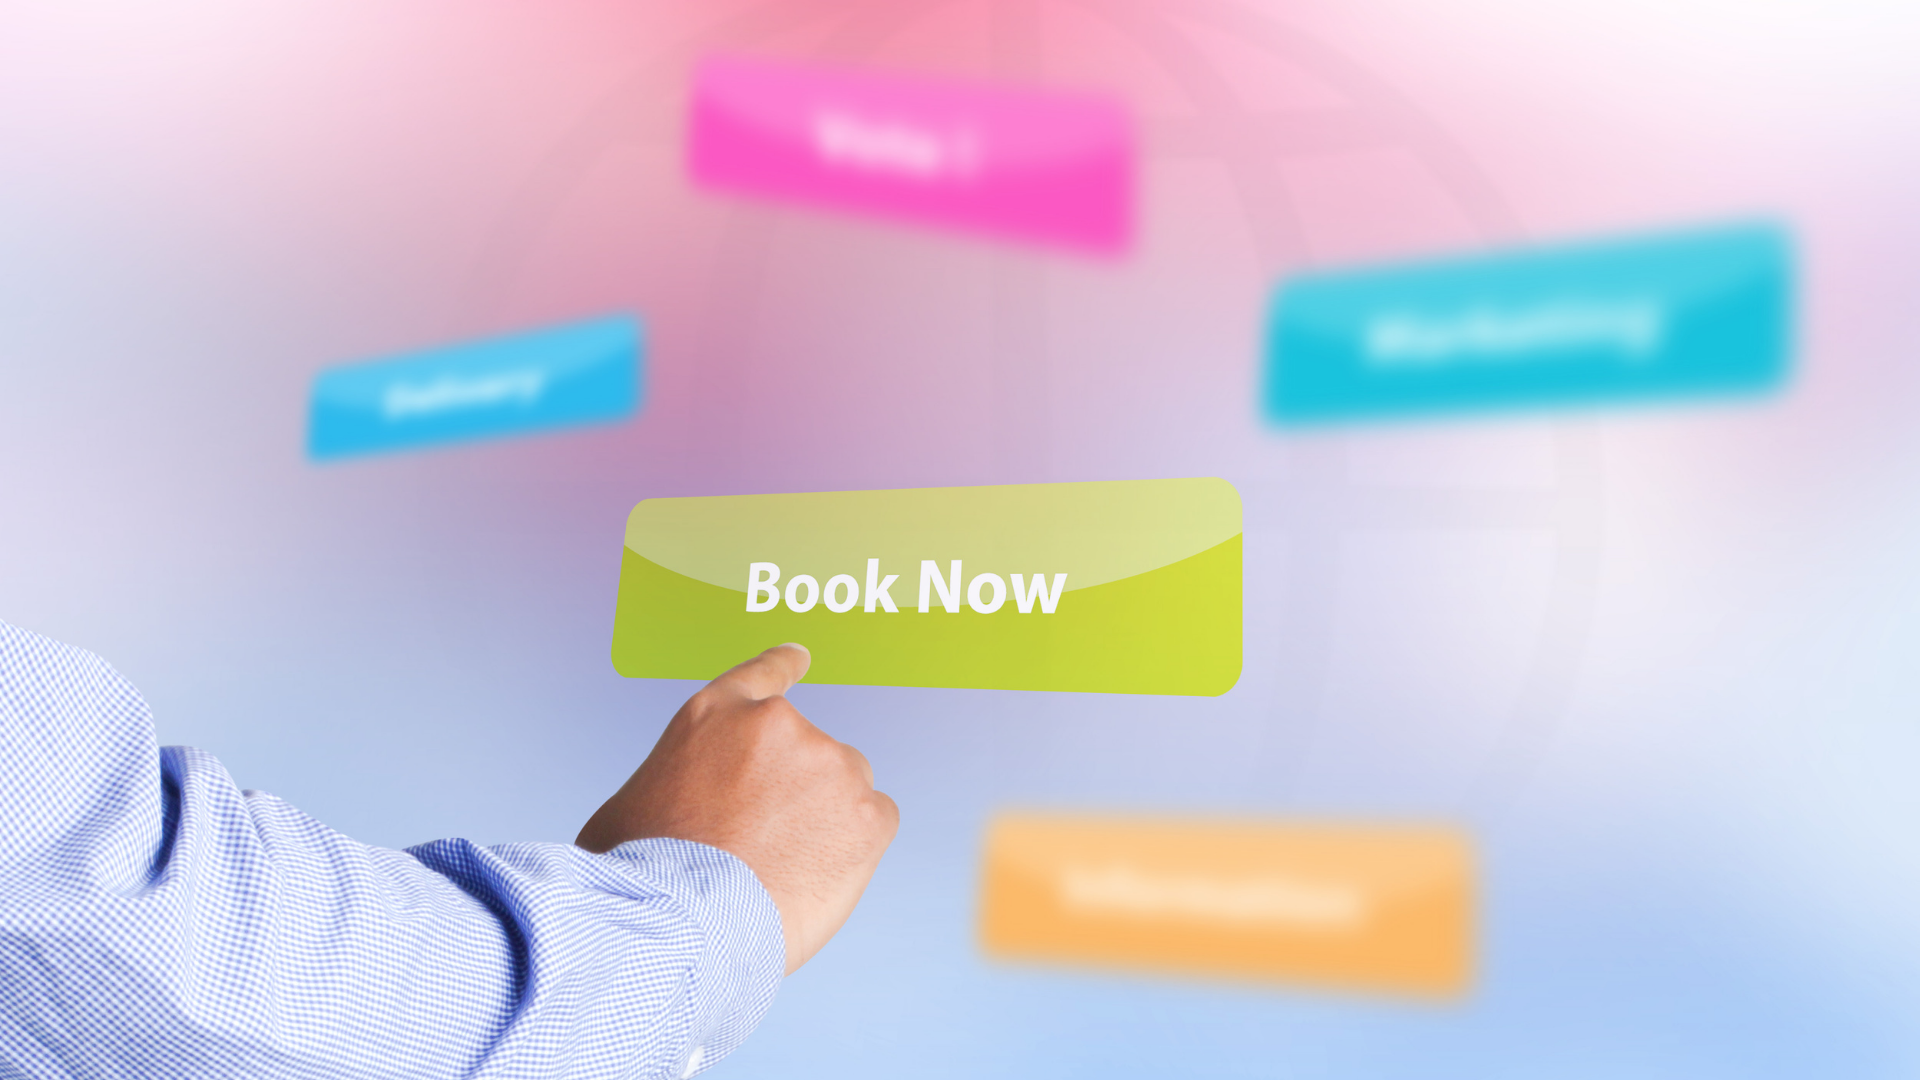 Book now button to book meeting rooms